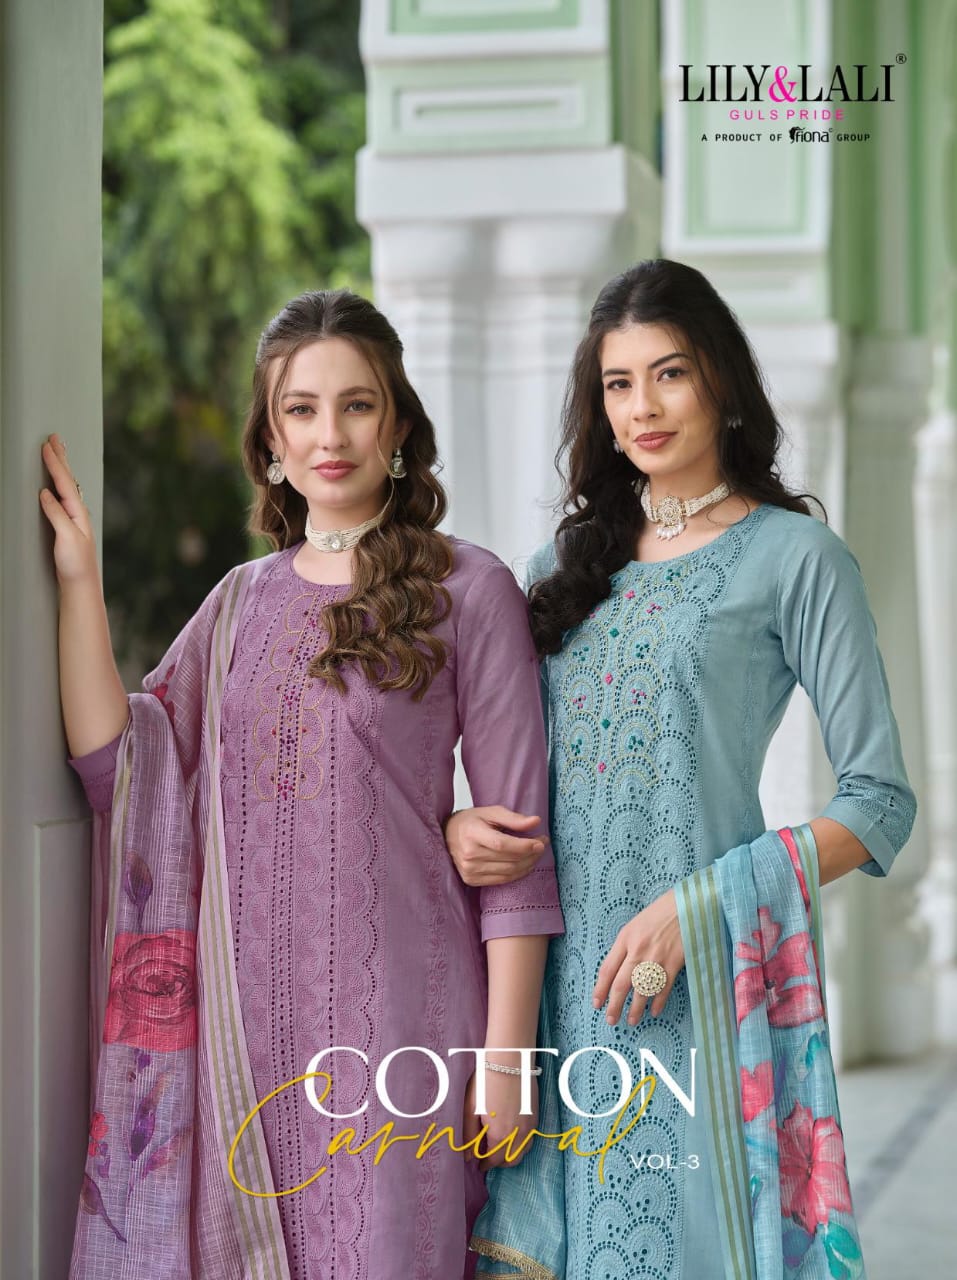 Cotton Carnival Vol 3 Lily Lali Readymade Pant Style Suits